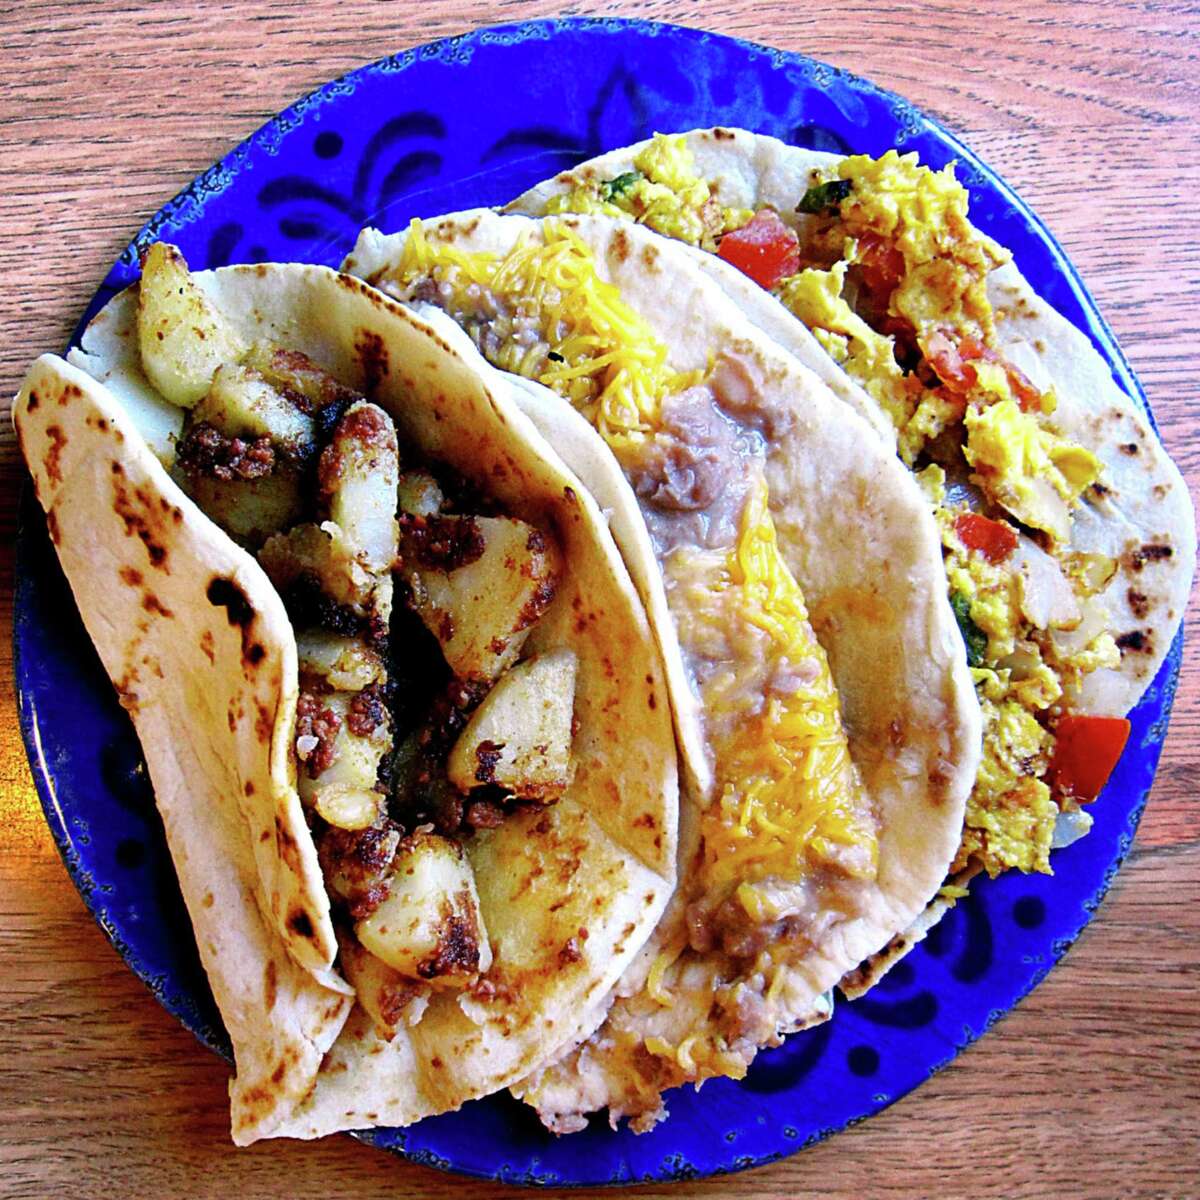 A trio of breakfast tacos on handmade flour tortillas. From left: potato and chorizo, bean and cheese and eggs a la mexicana from Taquería Guanajuato on Vine Street.